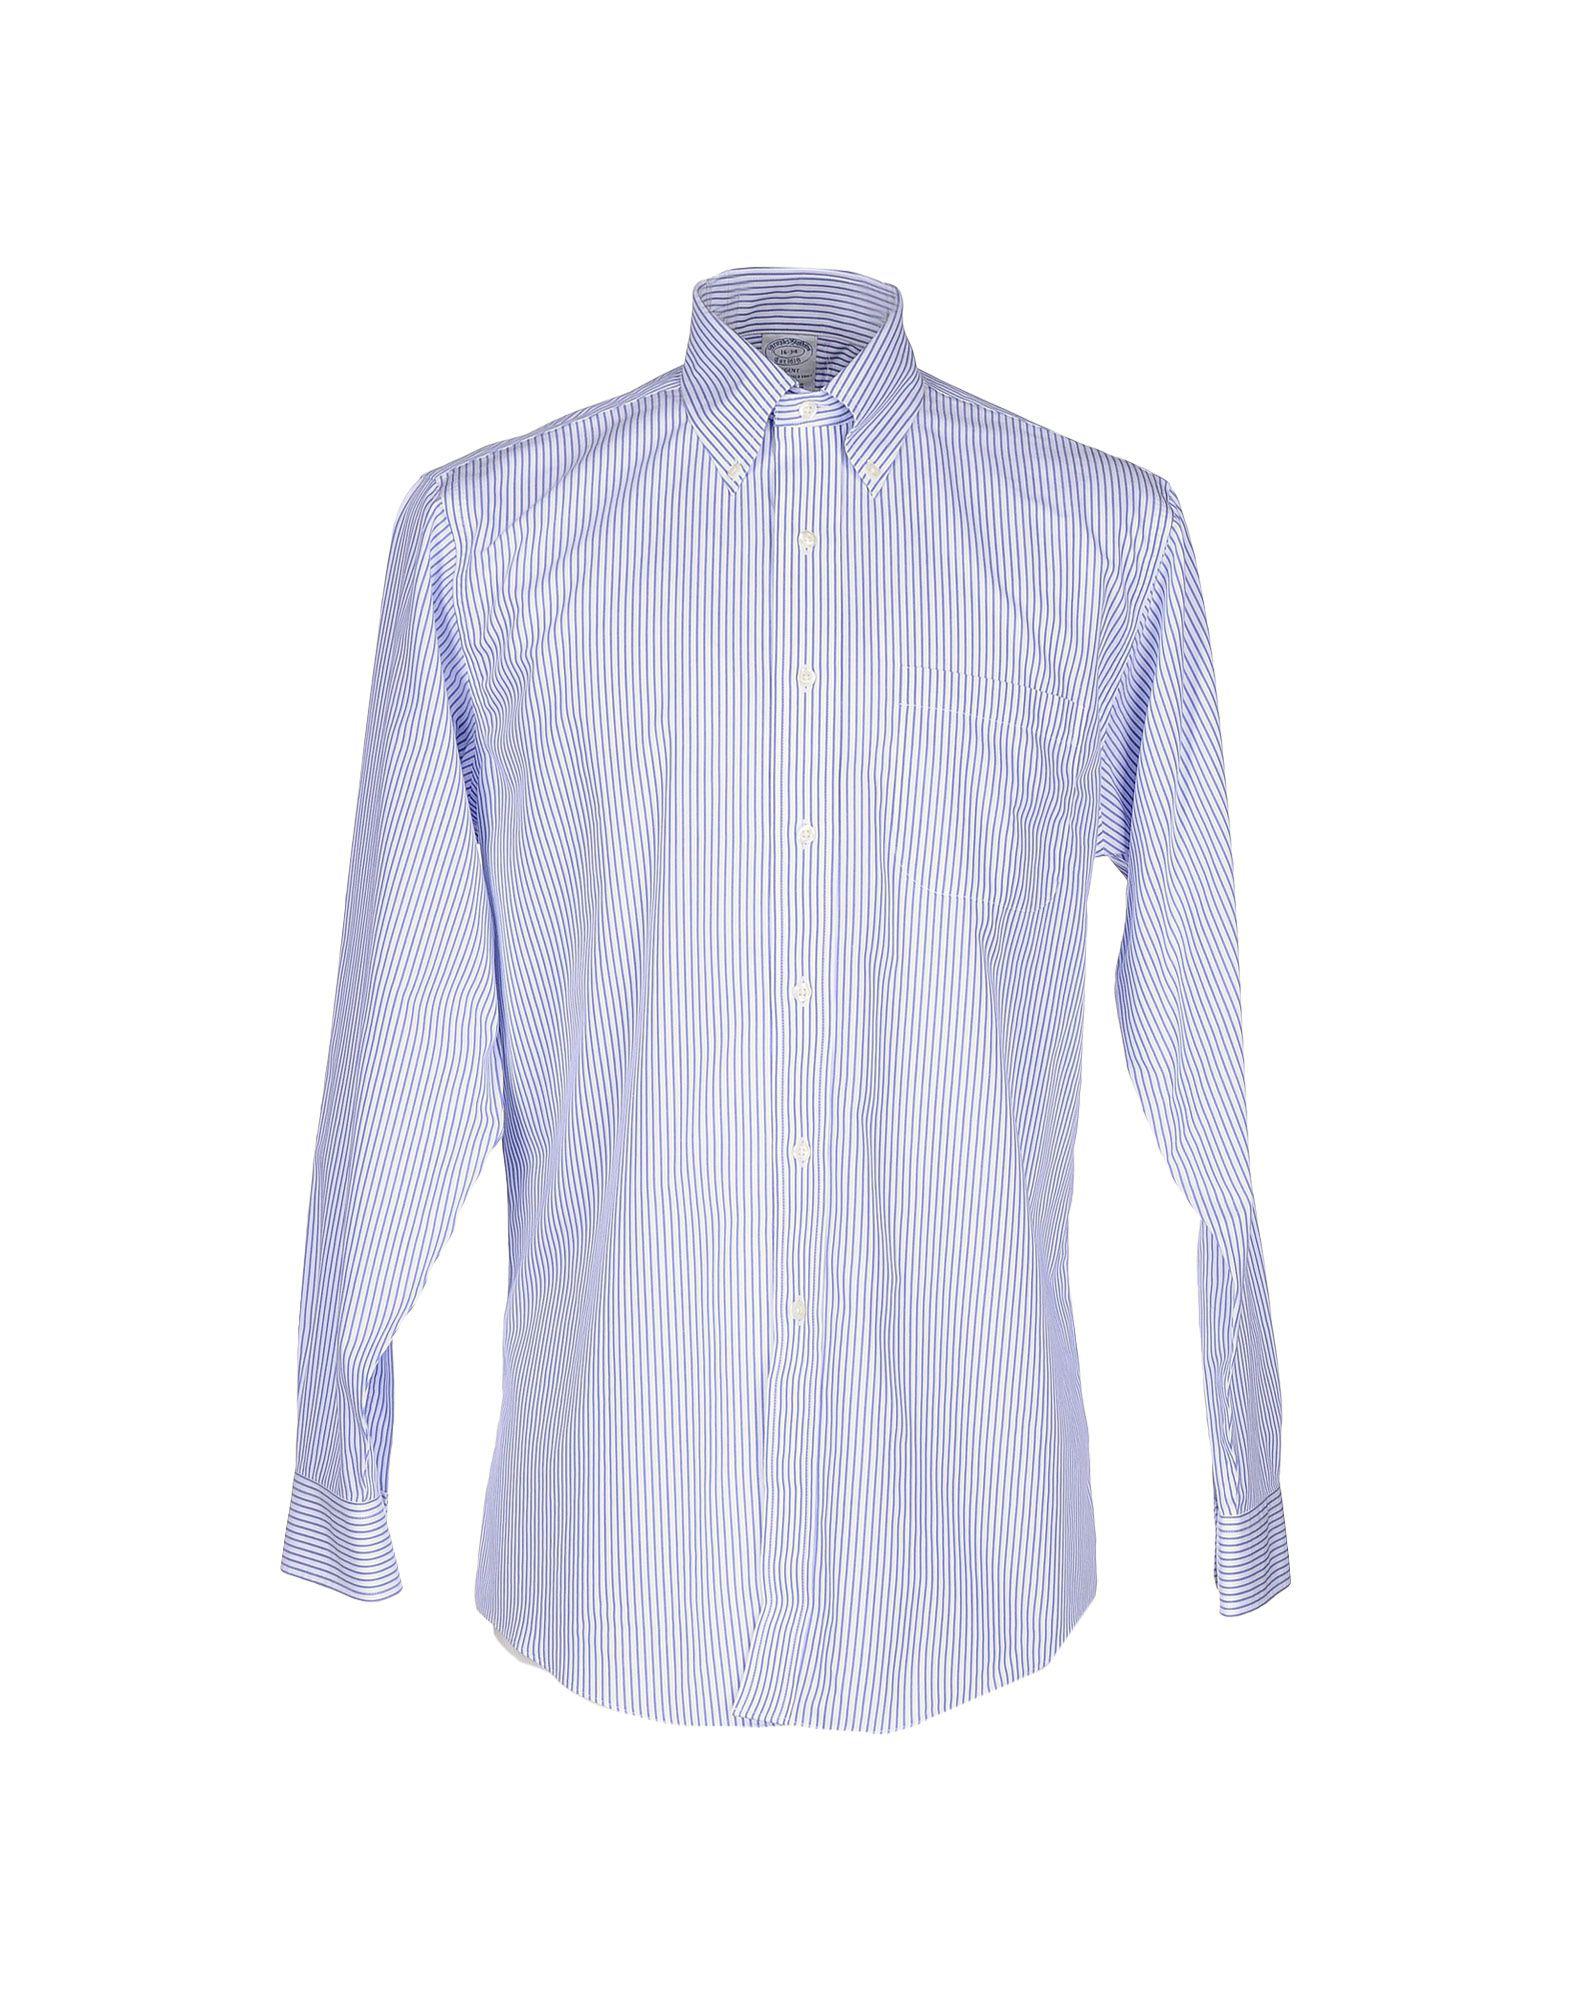 Brooks Brothers Cotton Shirt in Azure (Blue) for Men - Lyst